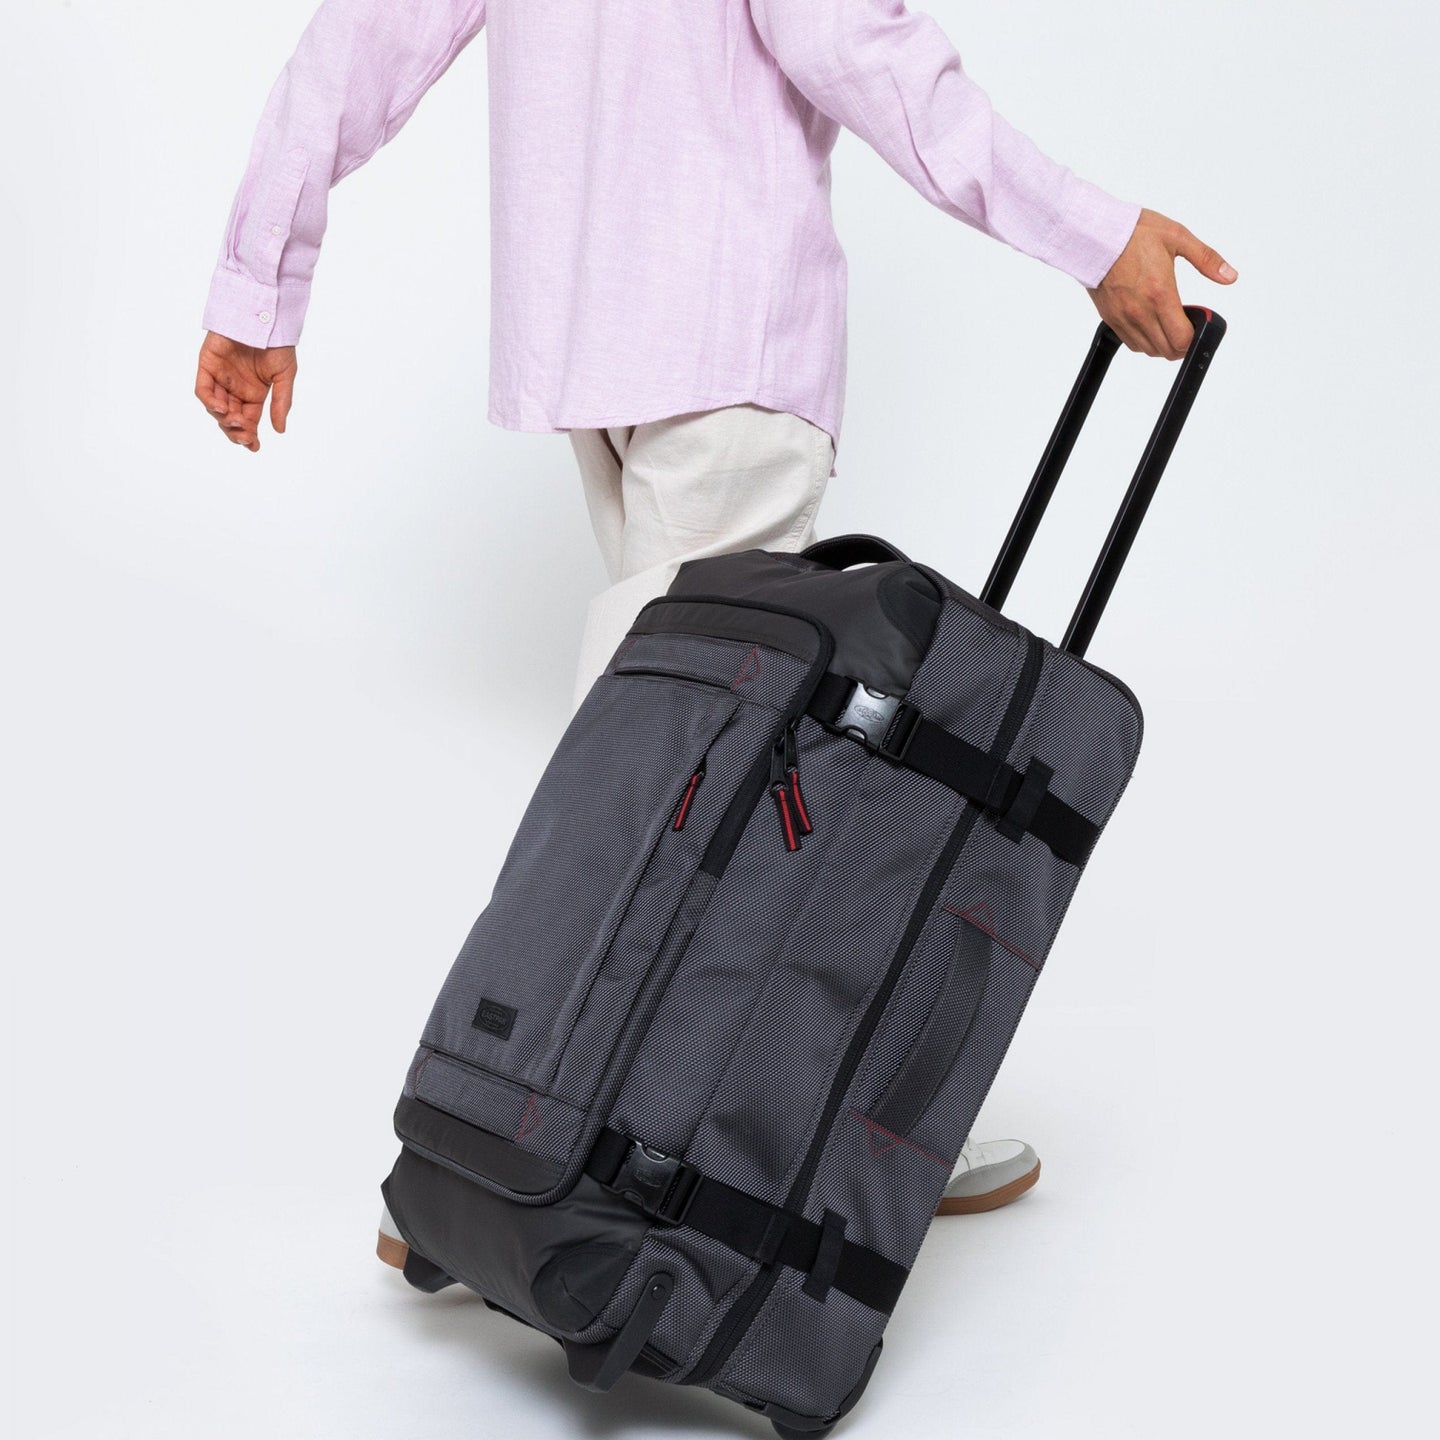 Tranverz Cnnct M Accent Grey Roller Luggage Side View With Model Walking